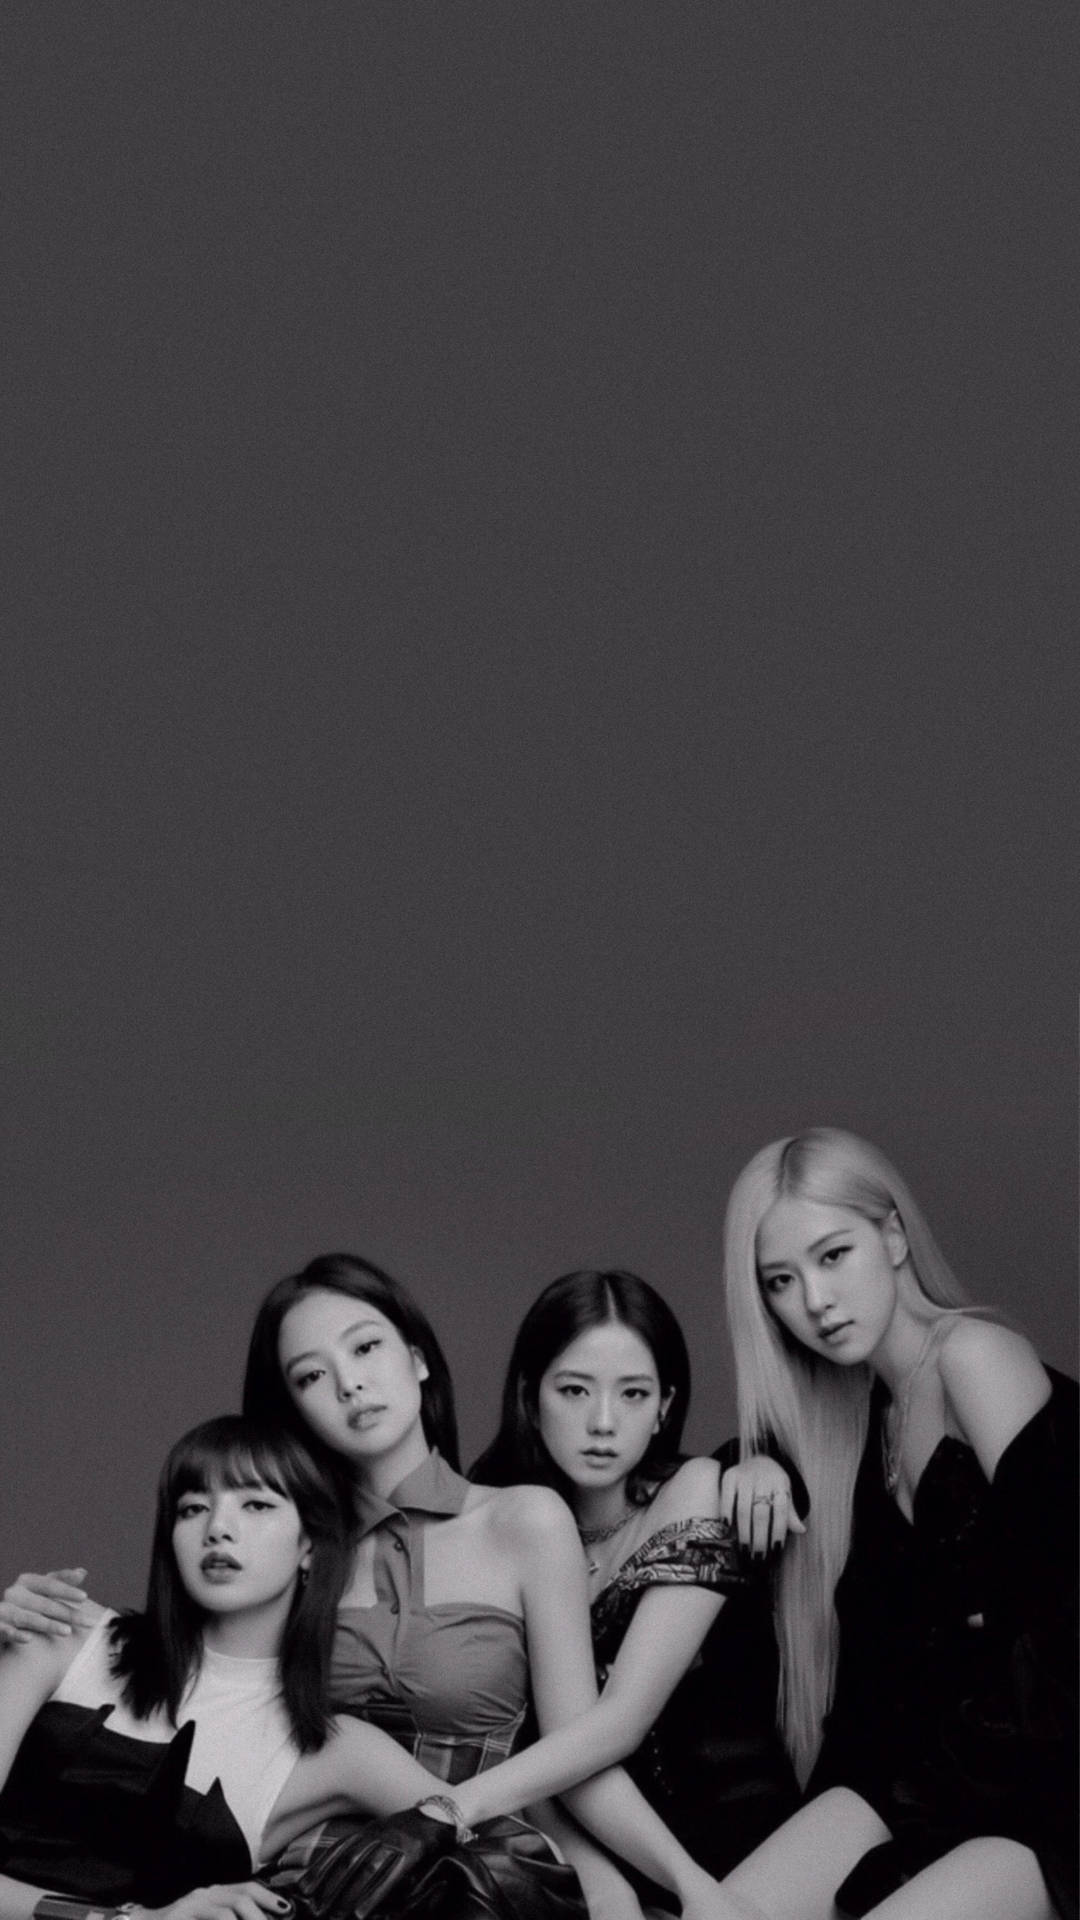 Black And White Blackpink Aesthetic